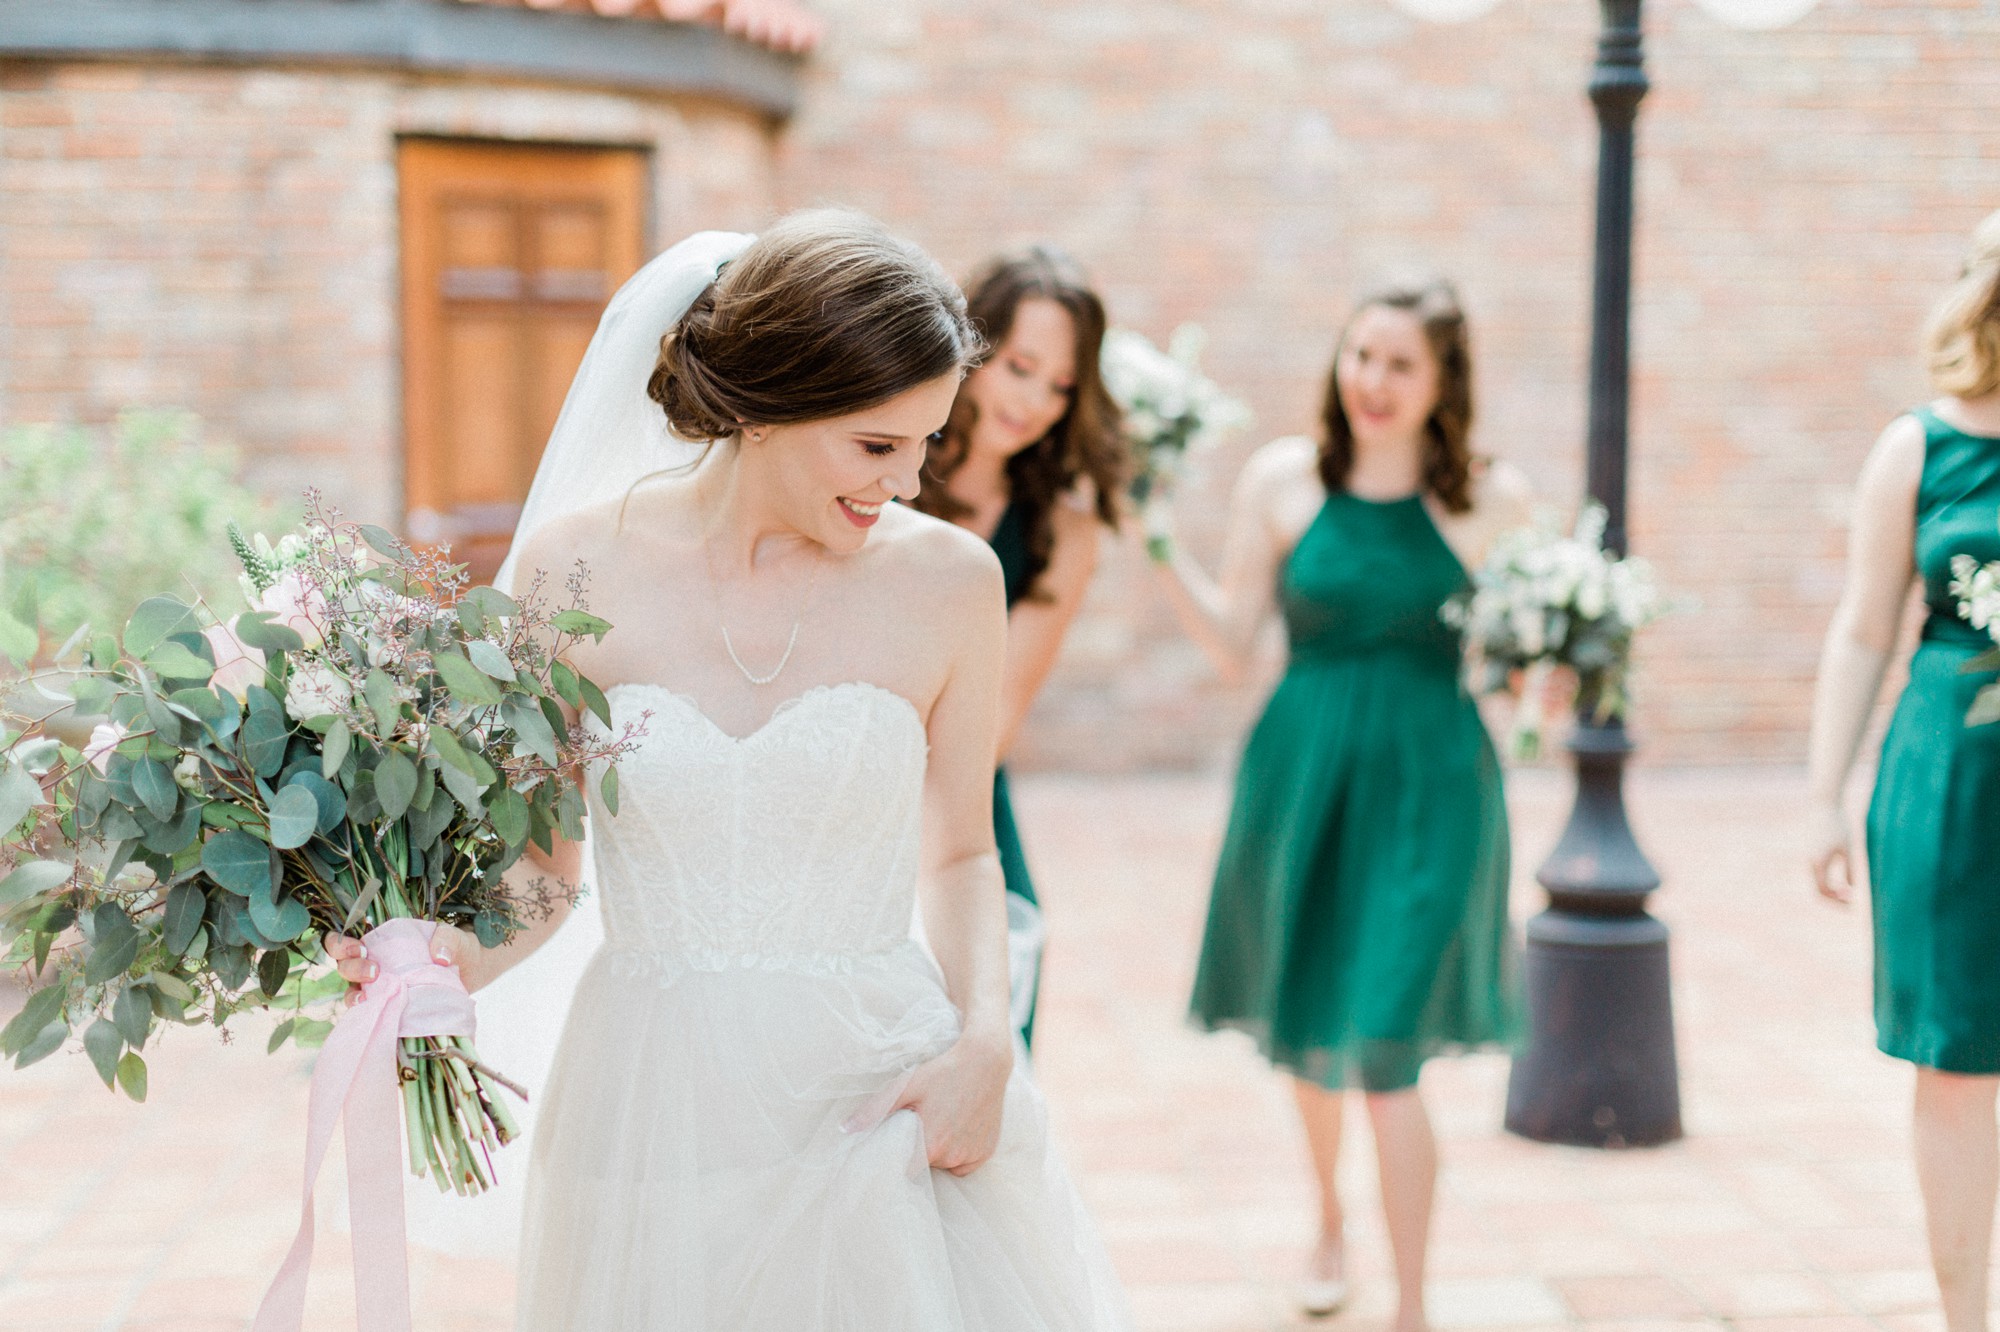 bride and bridesmaid, bhldn dress, emerald green bridesmaid, poison ivy floral design, spring wedding photo, the gallery, houston, texas, dreamy elk photography and design